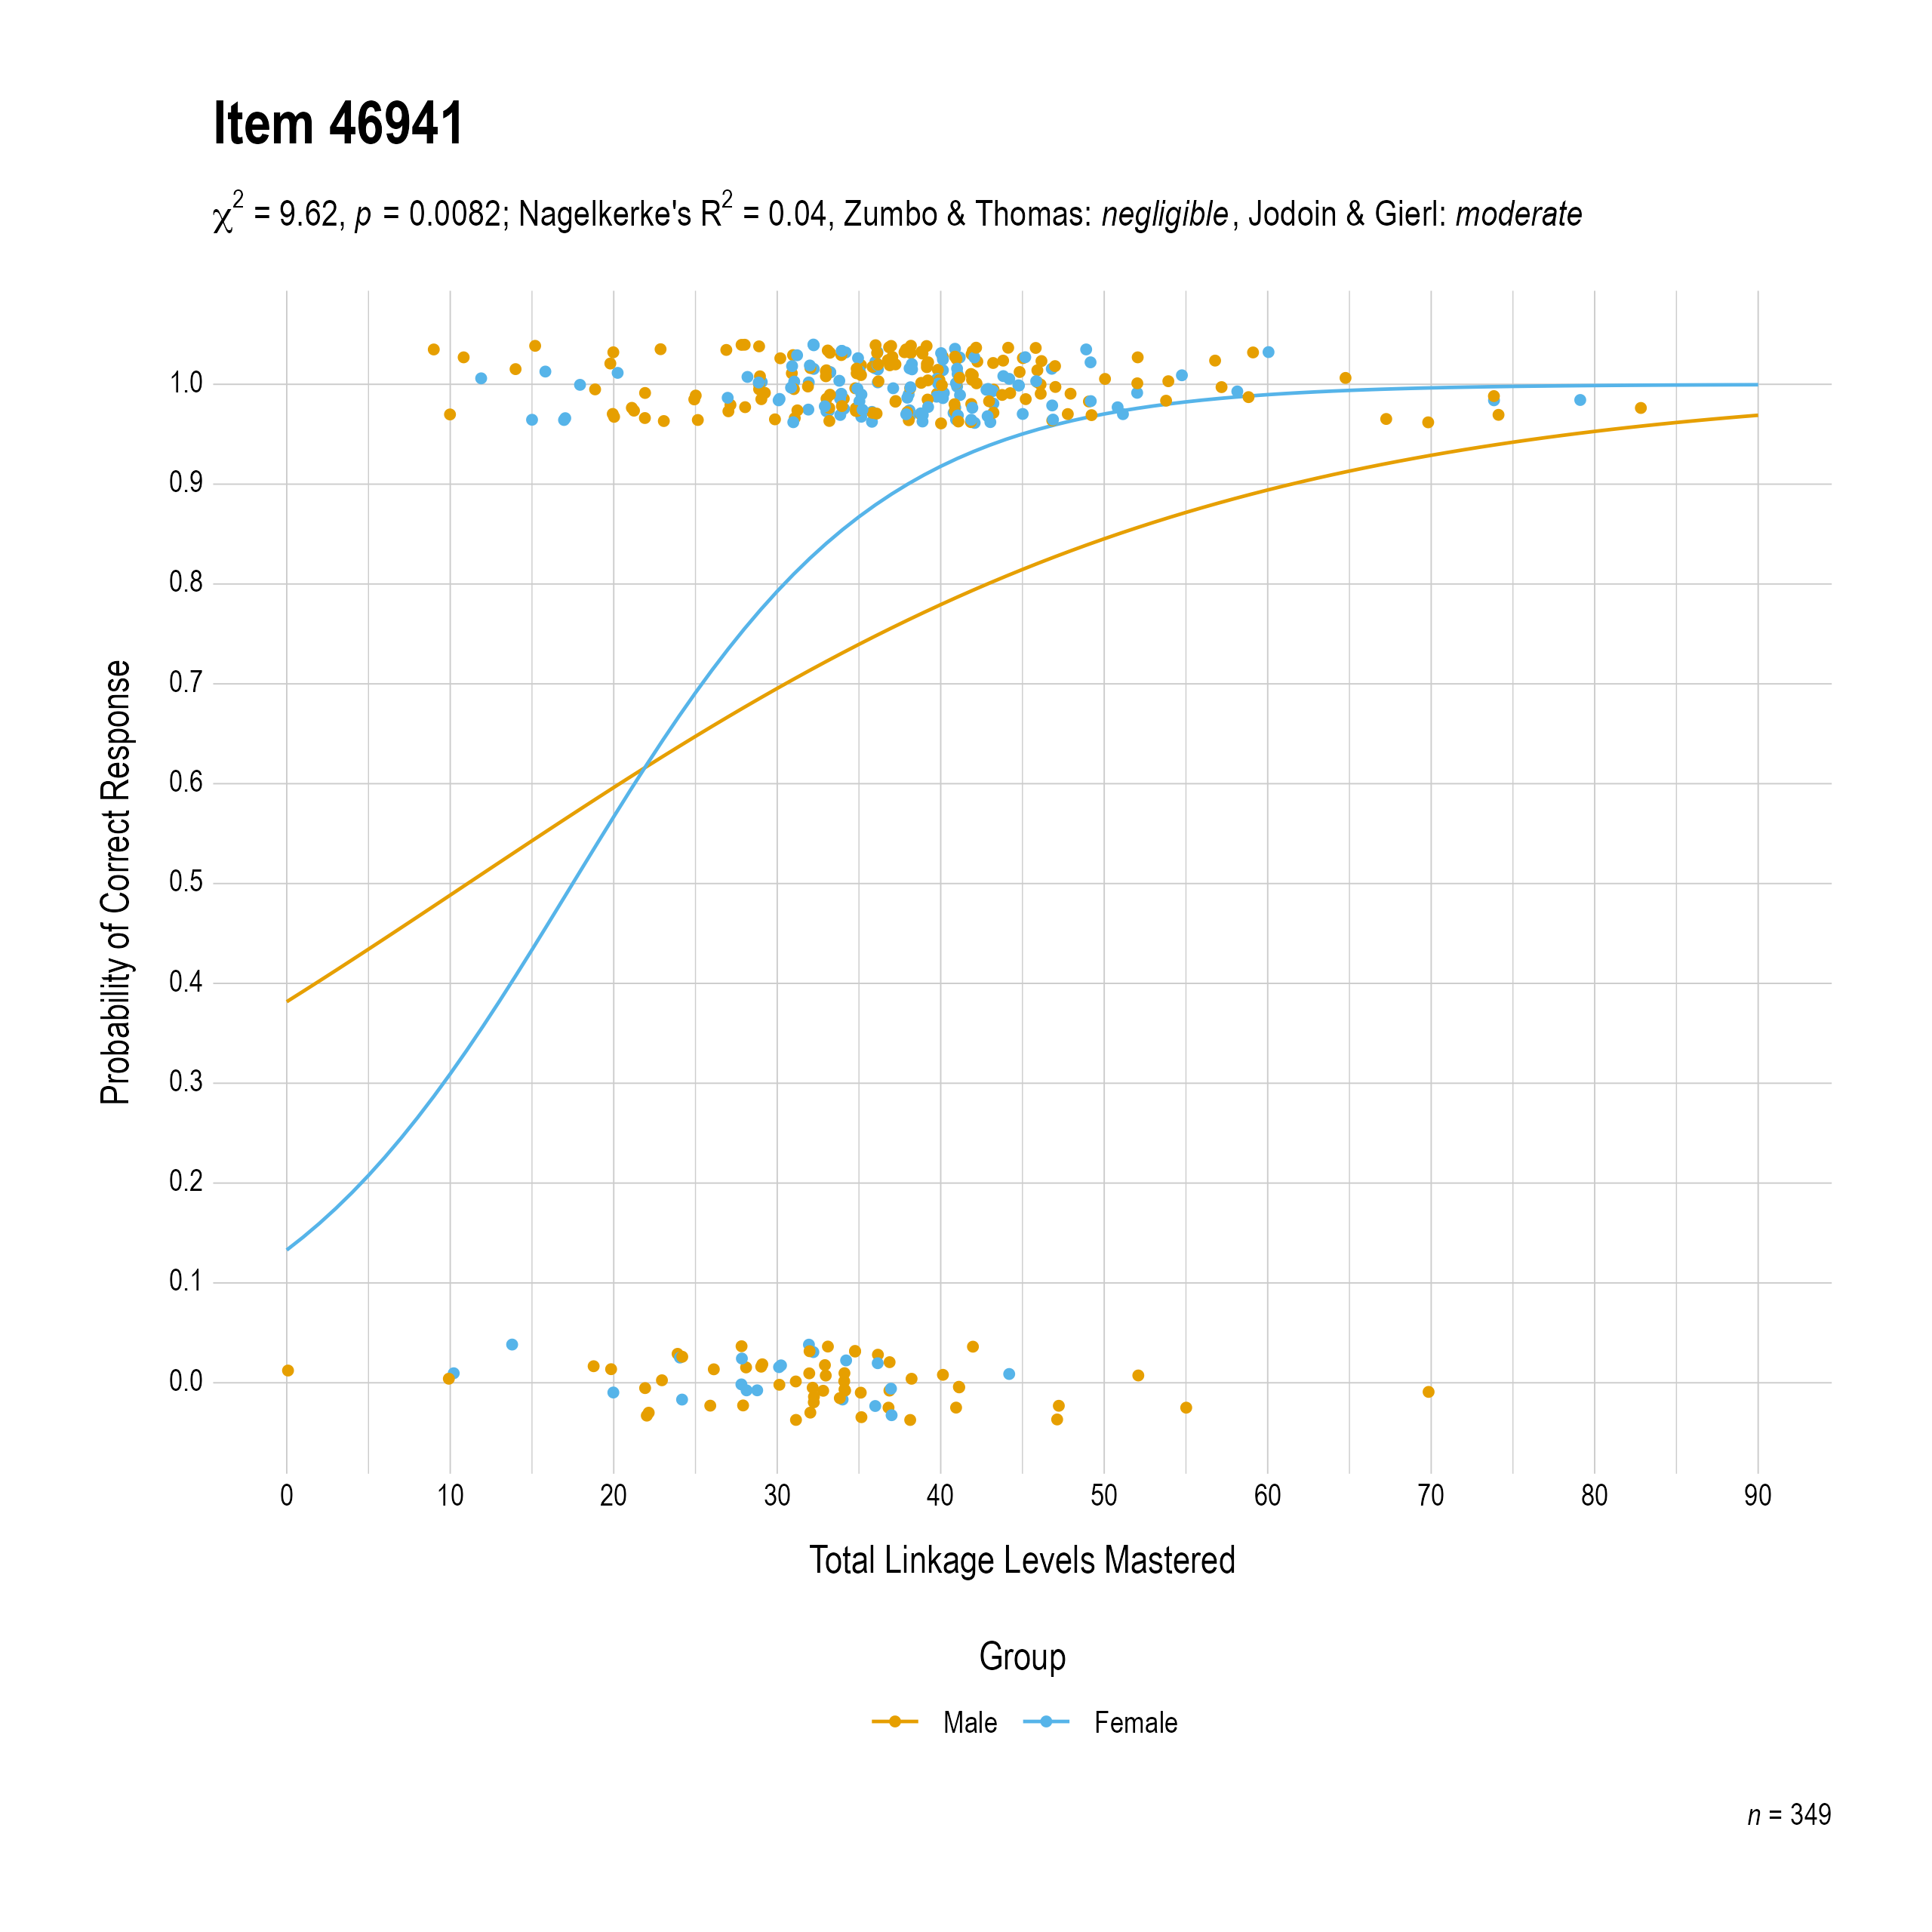 The plot of the combined gender differential item function evidence for English language arts item 46941. The figure contains points shaded by group. The figure also contains a logistic regression curve for each group. The total linkage levels mastered in is on the x-axis, and the probability of a correct response is on the y-axis.